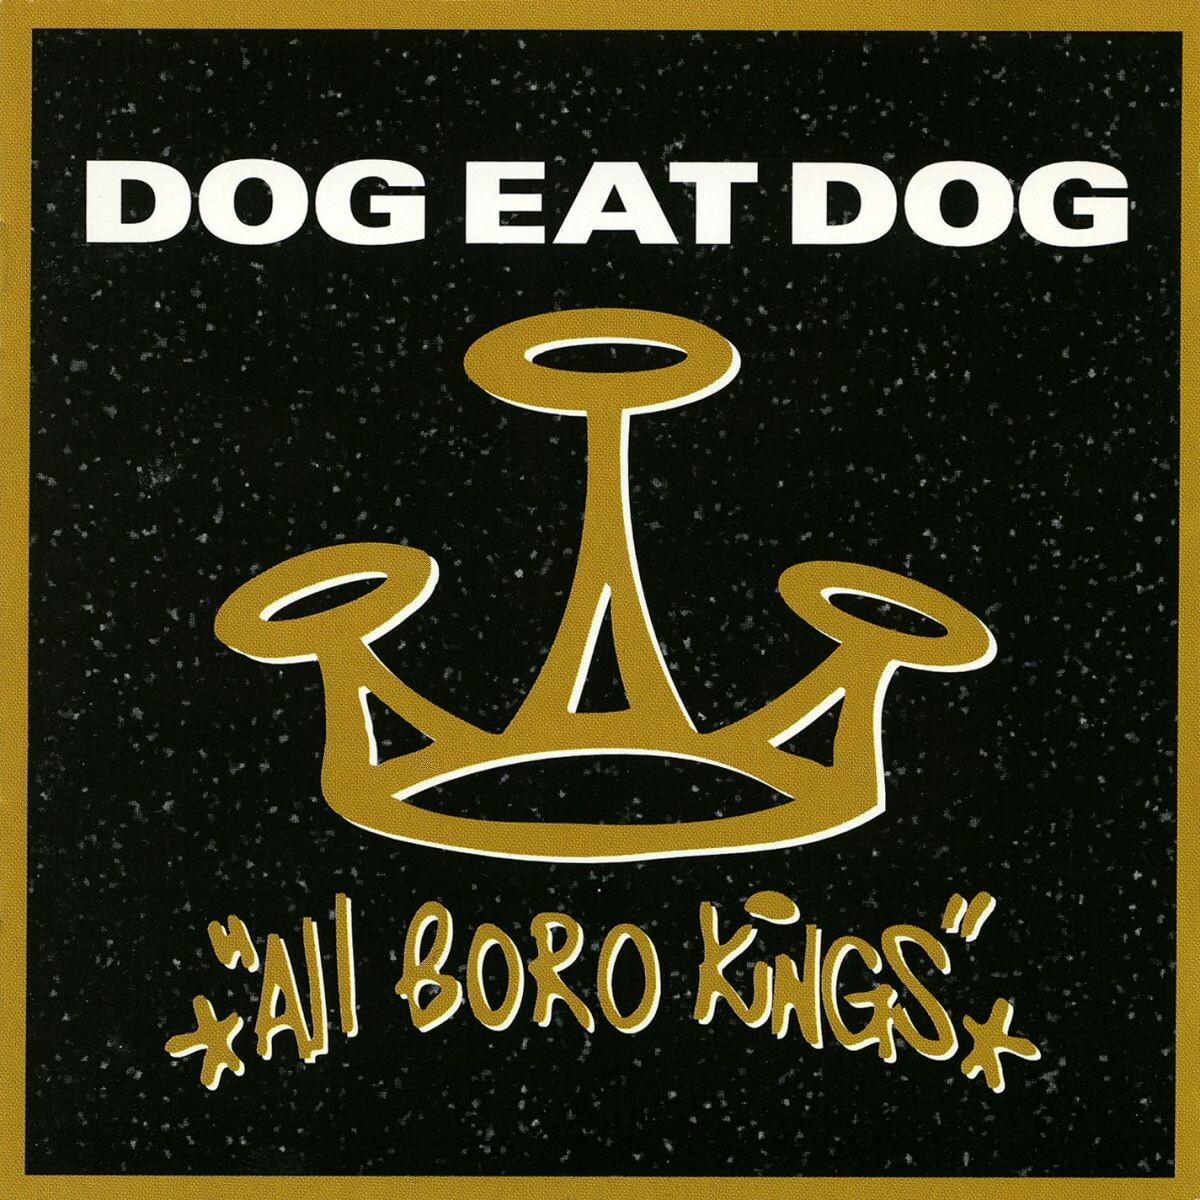 On this day in 1994 #DogEatDog released their debut studio album, All Boro Kings on @rrusa Remember buying this after hearing Who's The King and loving it, so many great songs on there from my youth! Only reached number 99 in the UK charts though! Shocking!